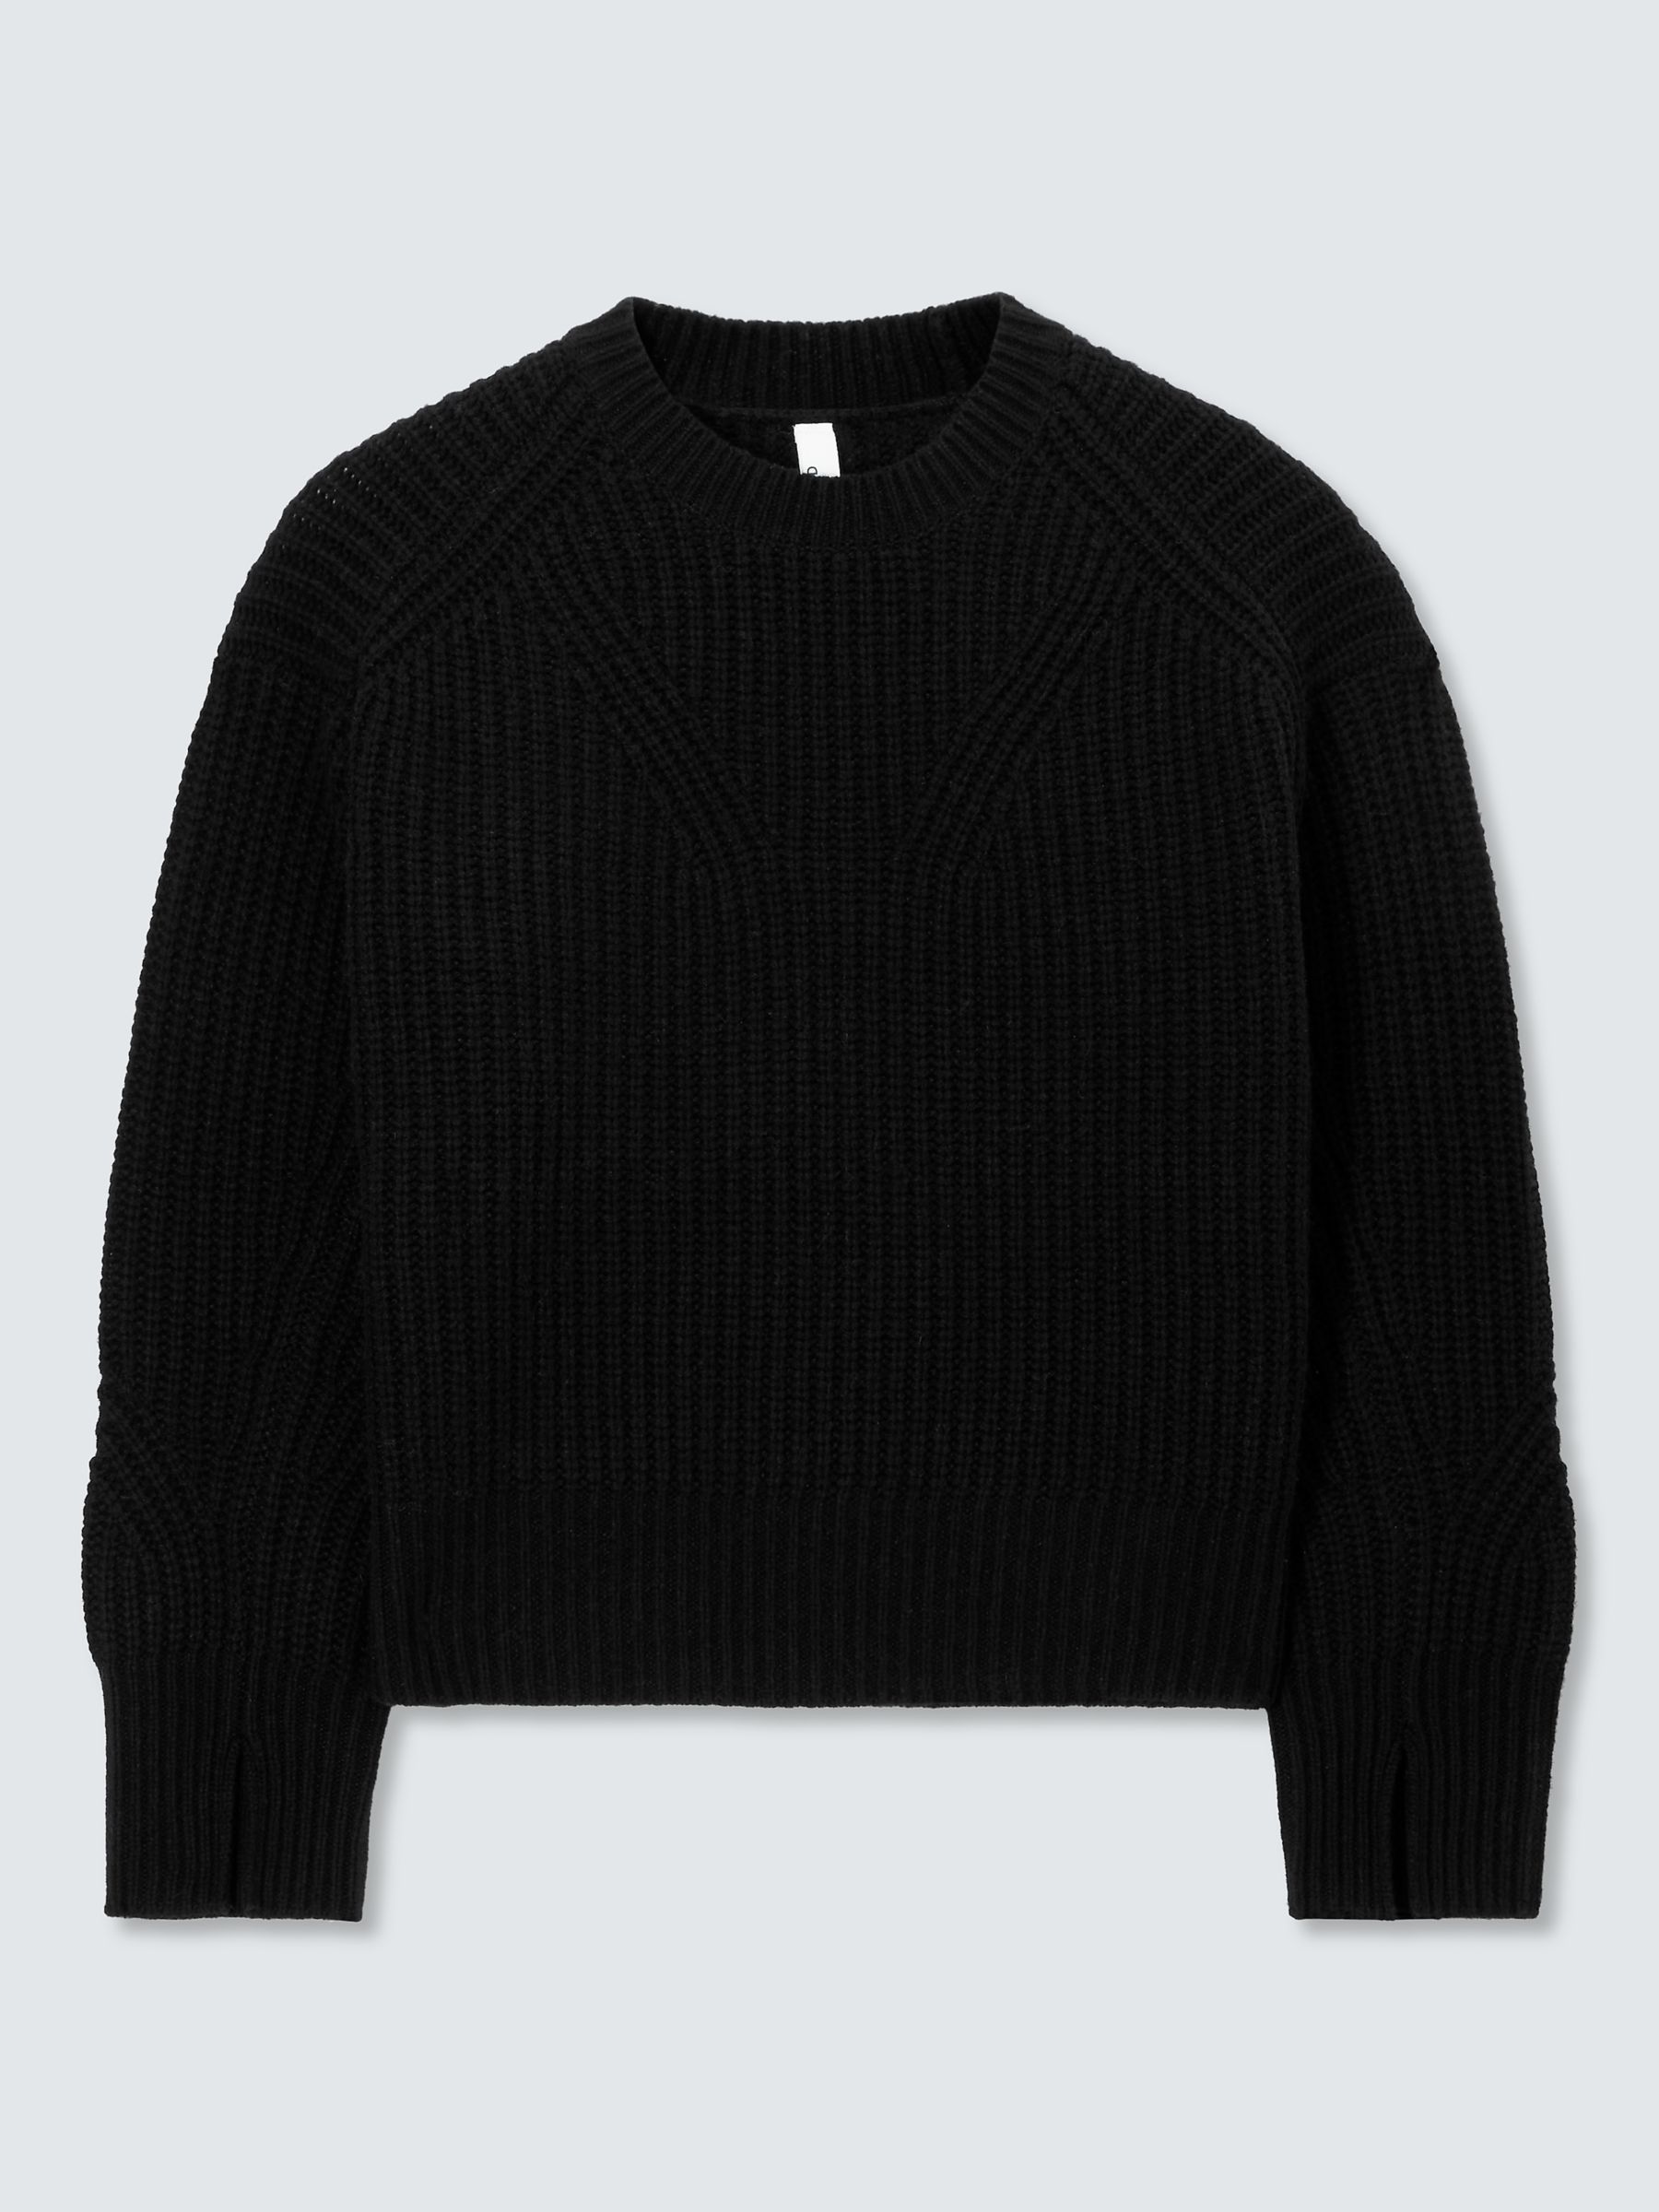 AND/OR Kimberley Cropped Wool Blend Jumper, Multi at John Lewis & Partners